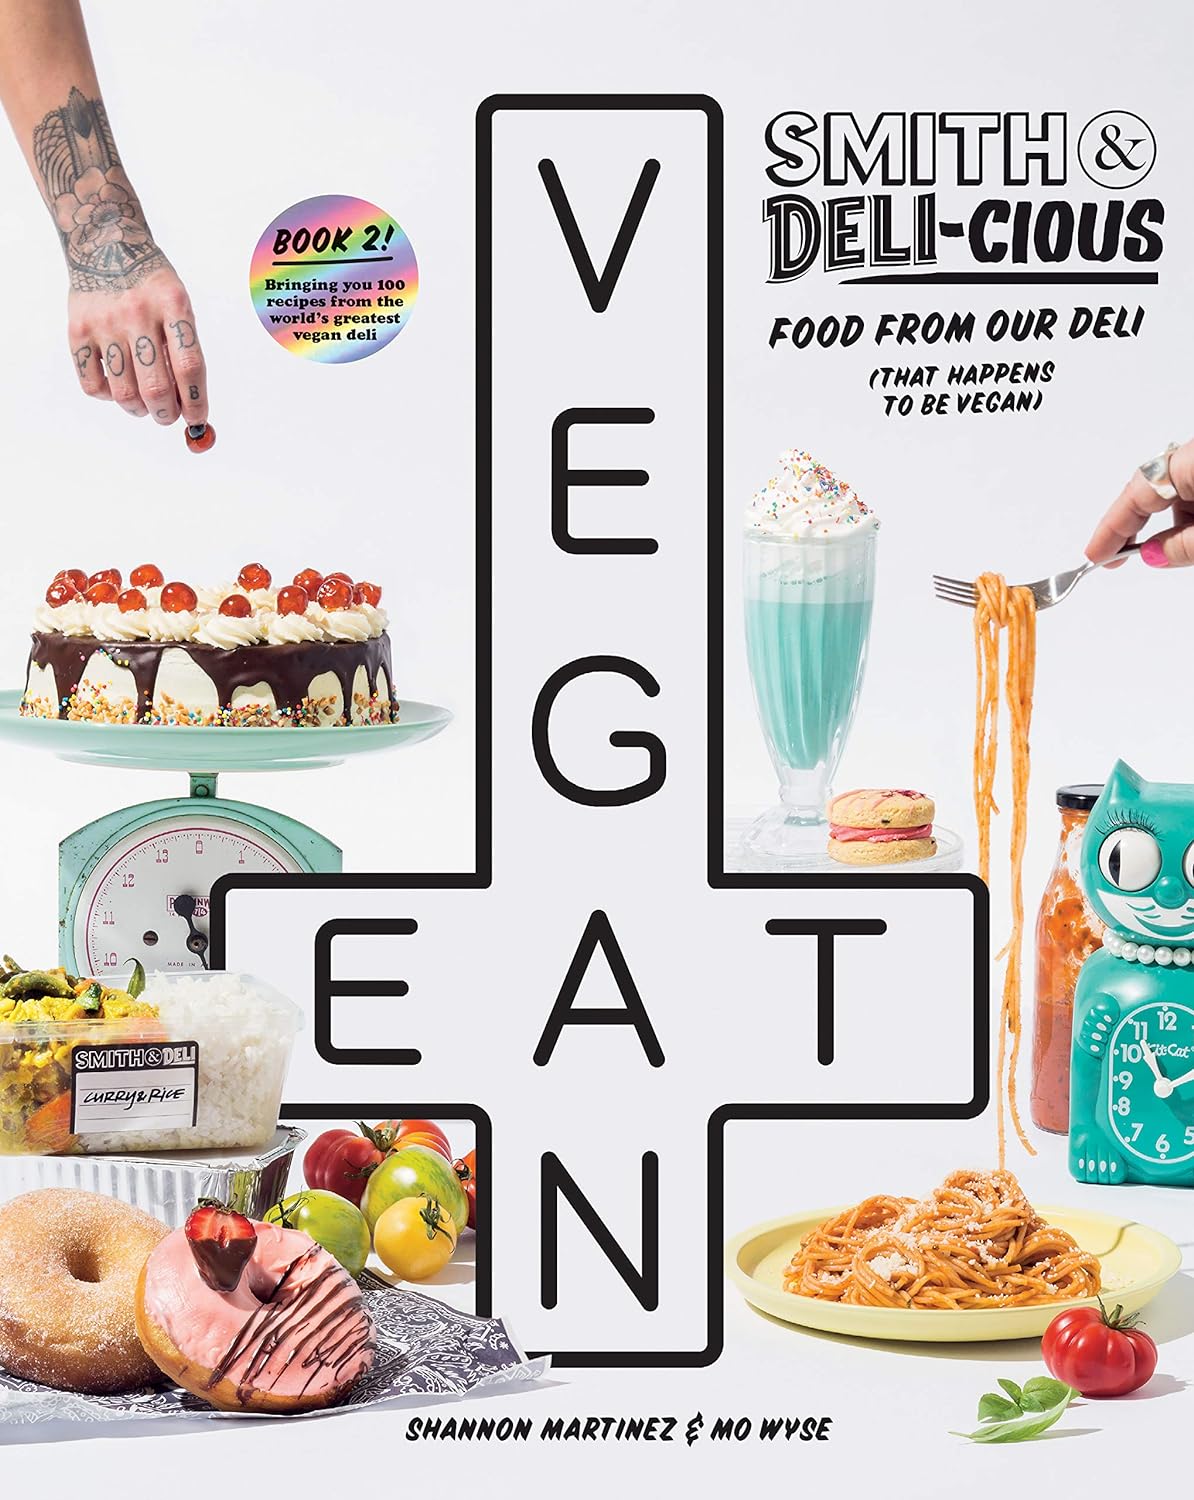 Smith & Deli-cious: Food From Our Deli (That Happens to be Vegan) (Shannon Martinez and Mo Wyse)